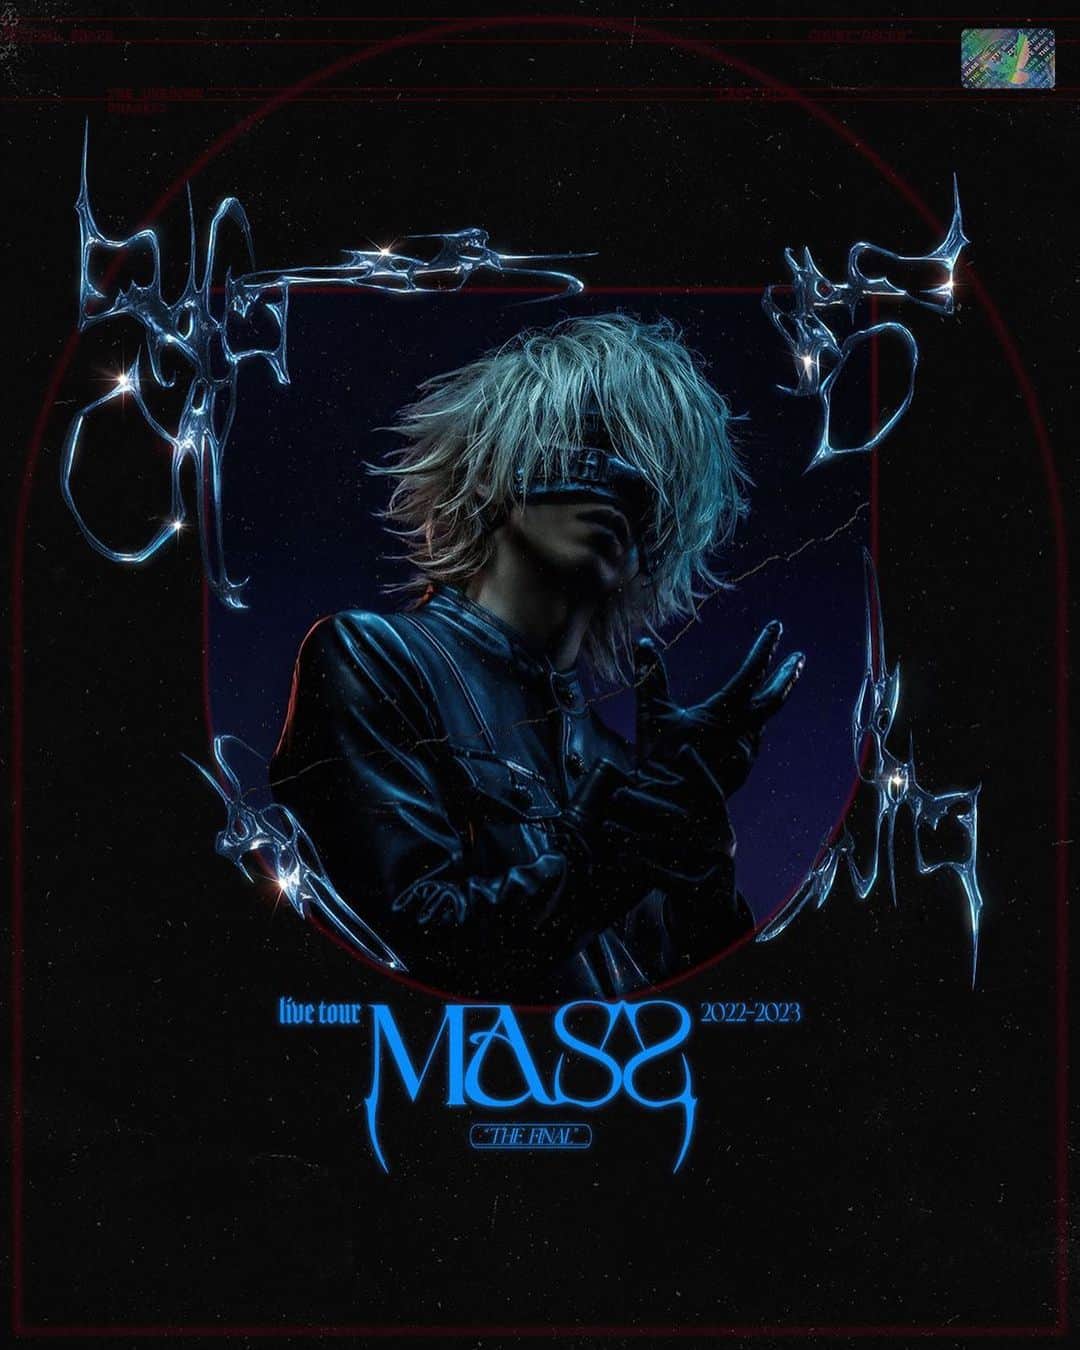 RUKI さんのインスタグラム写真 - (RUKI Instagram)「【MASS "THE FINAL" 日本武道館公演の最新ビジュアル解禁！】  2023年7月15日(土)、日本武道館にて開催される 『the GazettE LIVE TOUR2022-2023 MASS "THE FINAL”』 の最新ビジュアルが解禁✨  本日より本公演チケットのFC.HERESY 2次先行受付・プレイガイド先行受付もスタート🎫 この機会に是非ご利用ください！  the GazettE 10th ALBUM『MASS』の集大成。 その目に焼き付けて、共に最高の夜を過ごしましょう🔥  ■the GazettE LIVE TOUR2022-2023 MASS "THE FINAL" 2023年7月15日(土) 日本武道館 OPEN16:30/START17:30  [チケット情報] 全席指定 前売￥9,600(税込) ※未就学児入場不可、諸サービス手数料別  ▼チケット情報等の詳細は公演特設ページをチェック！ https://the-gazette.com/2023_mass_thefinal/  ＝＝＝＝＝＝＝  【The new visual for MASS "THE FINAL" at Nippon Budokan concert has been unveiled!】  It will be held at Nippon Budokan on Saturday, July 15, 2023. 『the GazettE LIVE TOUR2022-2023 MASS "THE FINAL"』 The new visual has been unveiled!  From today, FC.HERESY 2nd pre-registration and play guide pre-registration for this live ticket will also start! ! Please take advantage of this opportunity!  The culmination of the GazettE 10th ALBUM "MASS". Burn it into your eyes and let's spend the best night together!  ■the GazettE LIVE TOUR2022-2023 MASS "THE FINAL" July 15th (Sat), 2023 Nippon Budokan OPEN16:30/START17:30  [TICKET INFORMATION] All seats reserved : Advance ¥9,600(tax included) *No admission for preschool children. *Service fee not included.  ▼For ticket information, please check the special page! https://the-gazette.com/2023_mass_thefinal/  #theGazettE #TOURFINAL #MASS #日本武道館」5月26日 20時04分 - ruki_nilduenilun